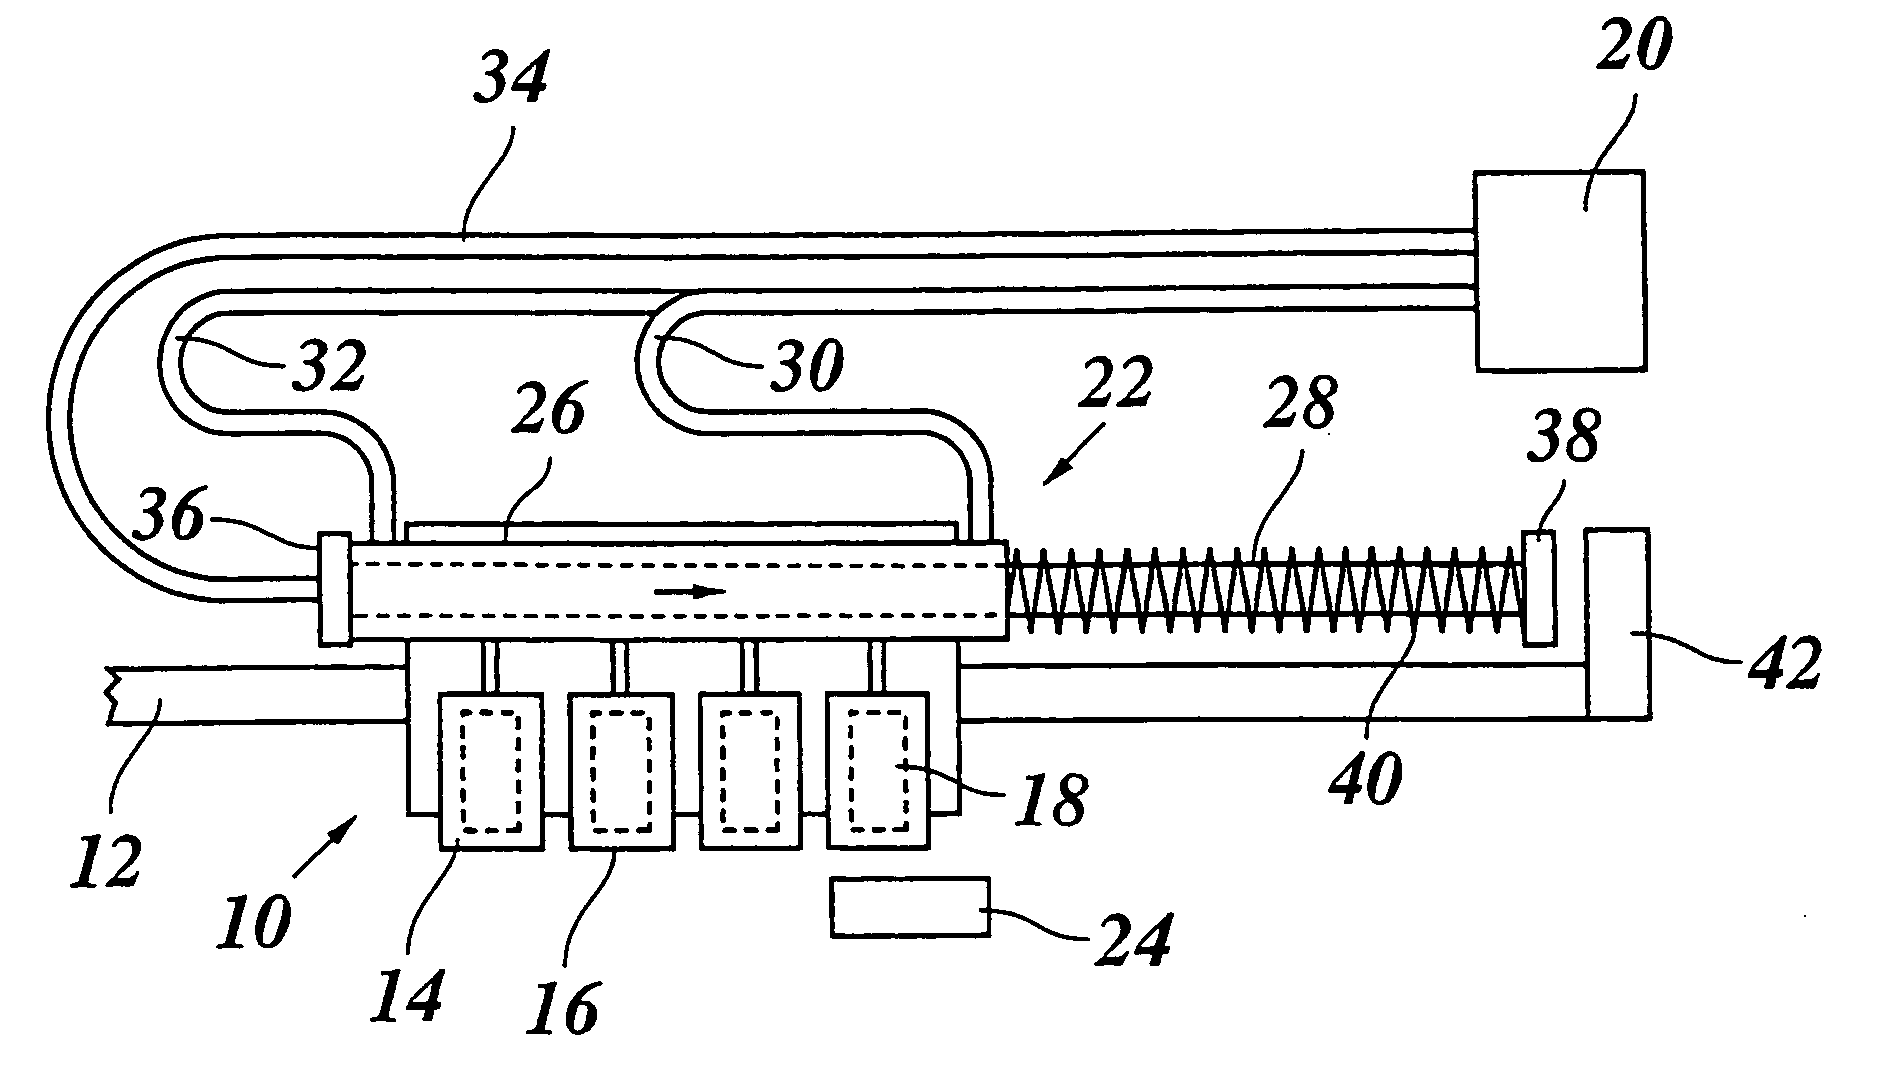 Nozzle cleaning device for an ink jet printer